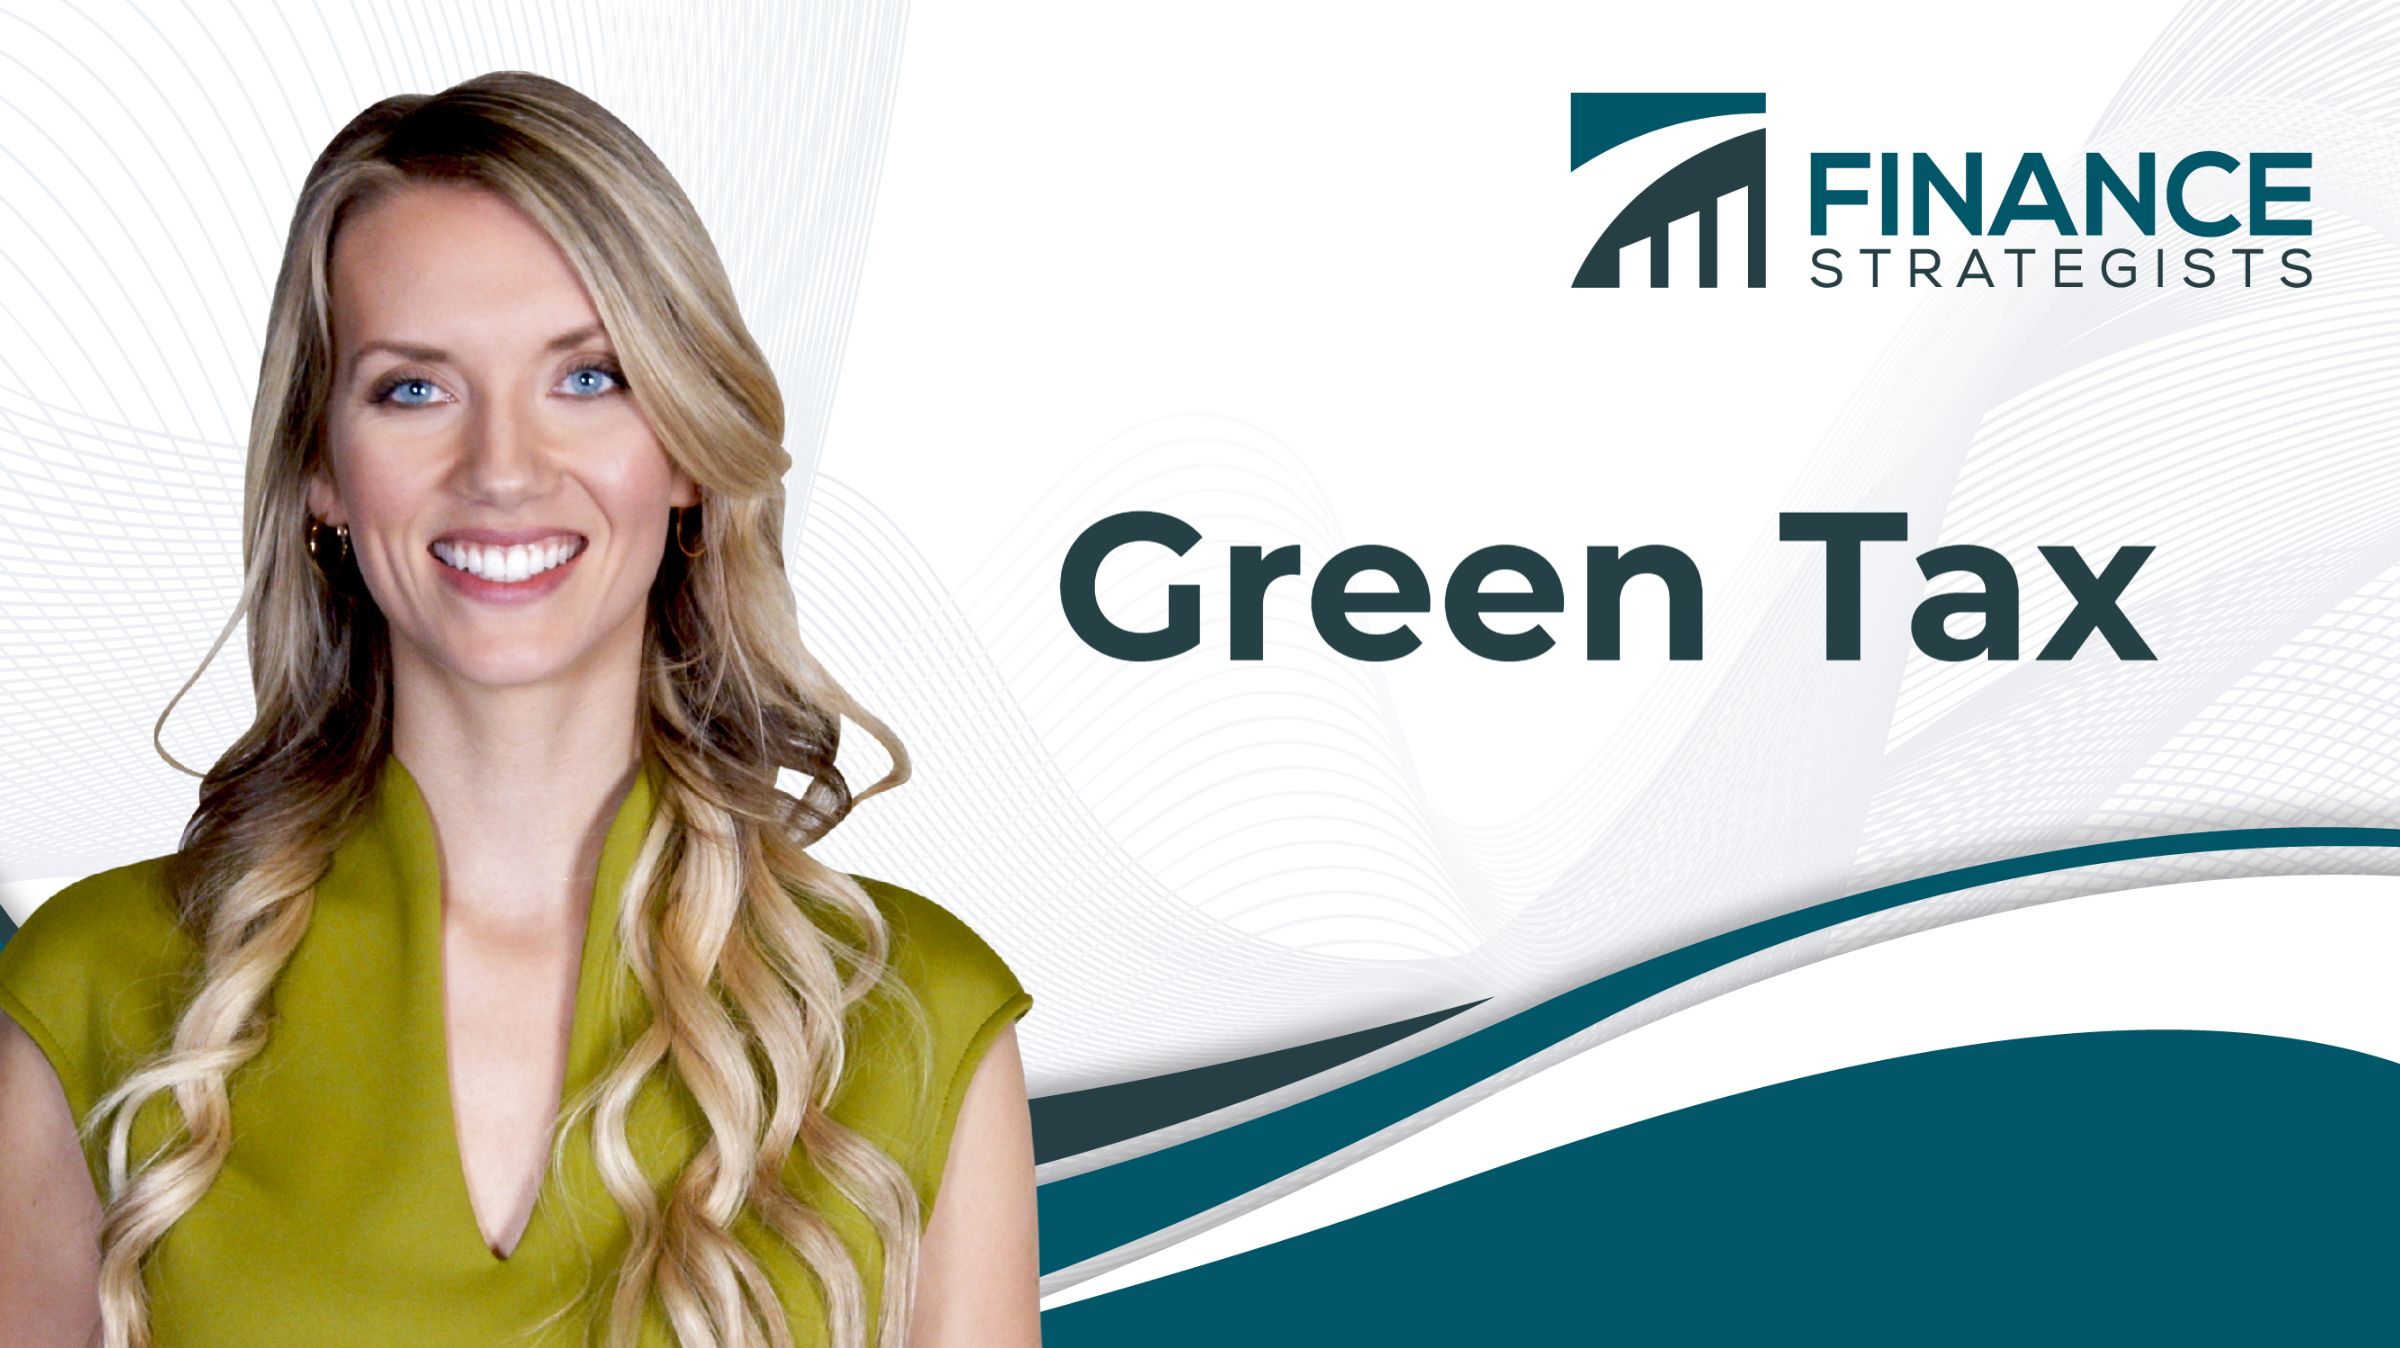 Green Tax Environmental Tax Definition Meaning Pros and Cons